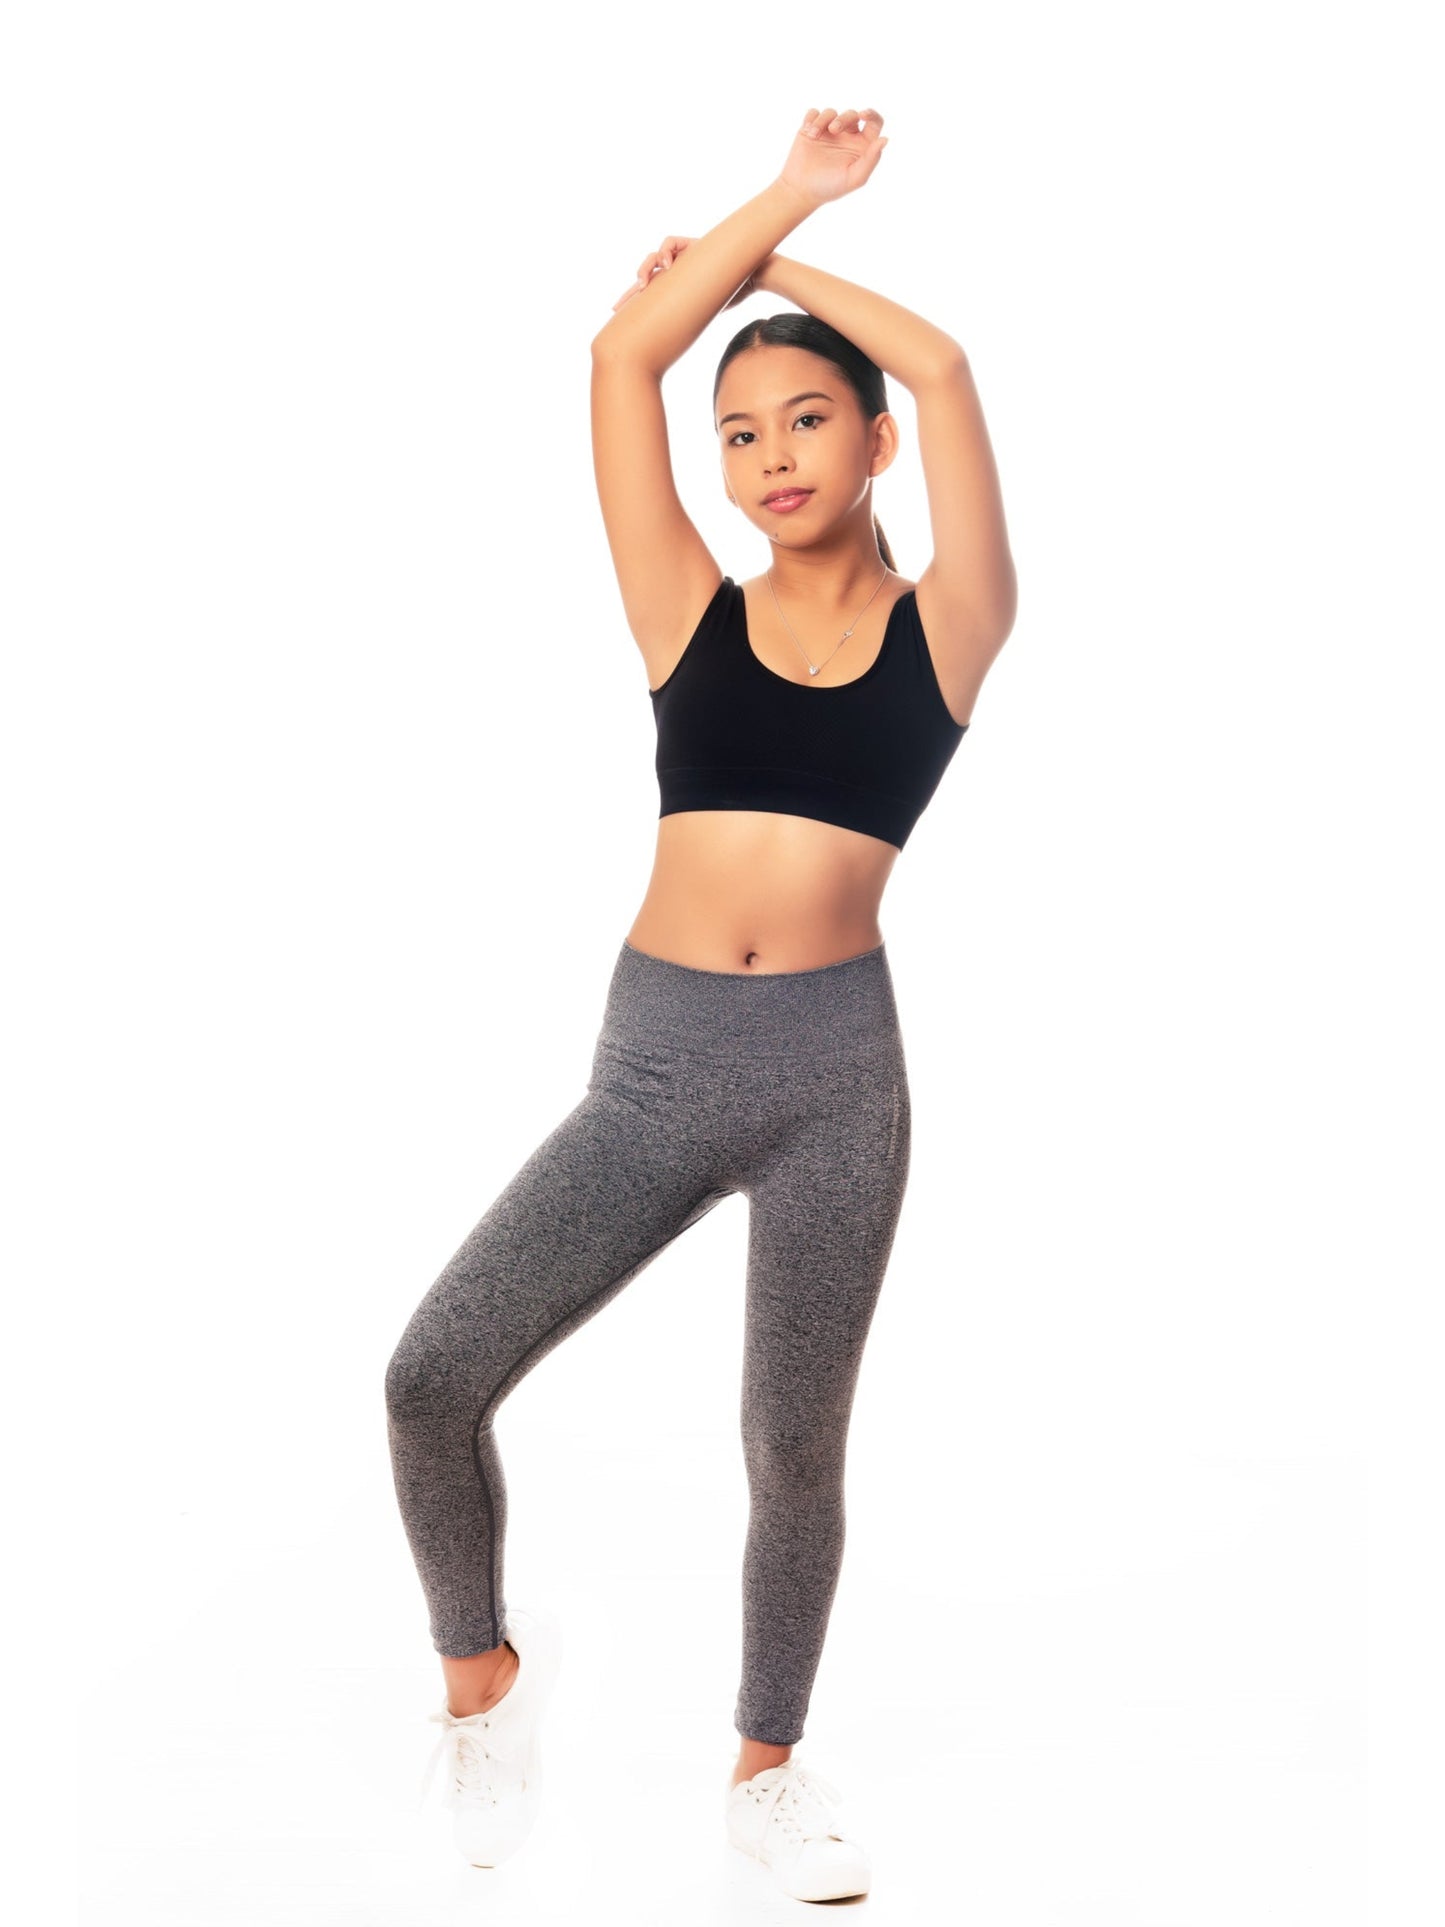 Shop Girls Activewear  Girls Apparel & Activewear by Limeapple